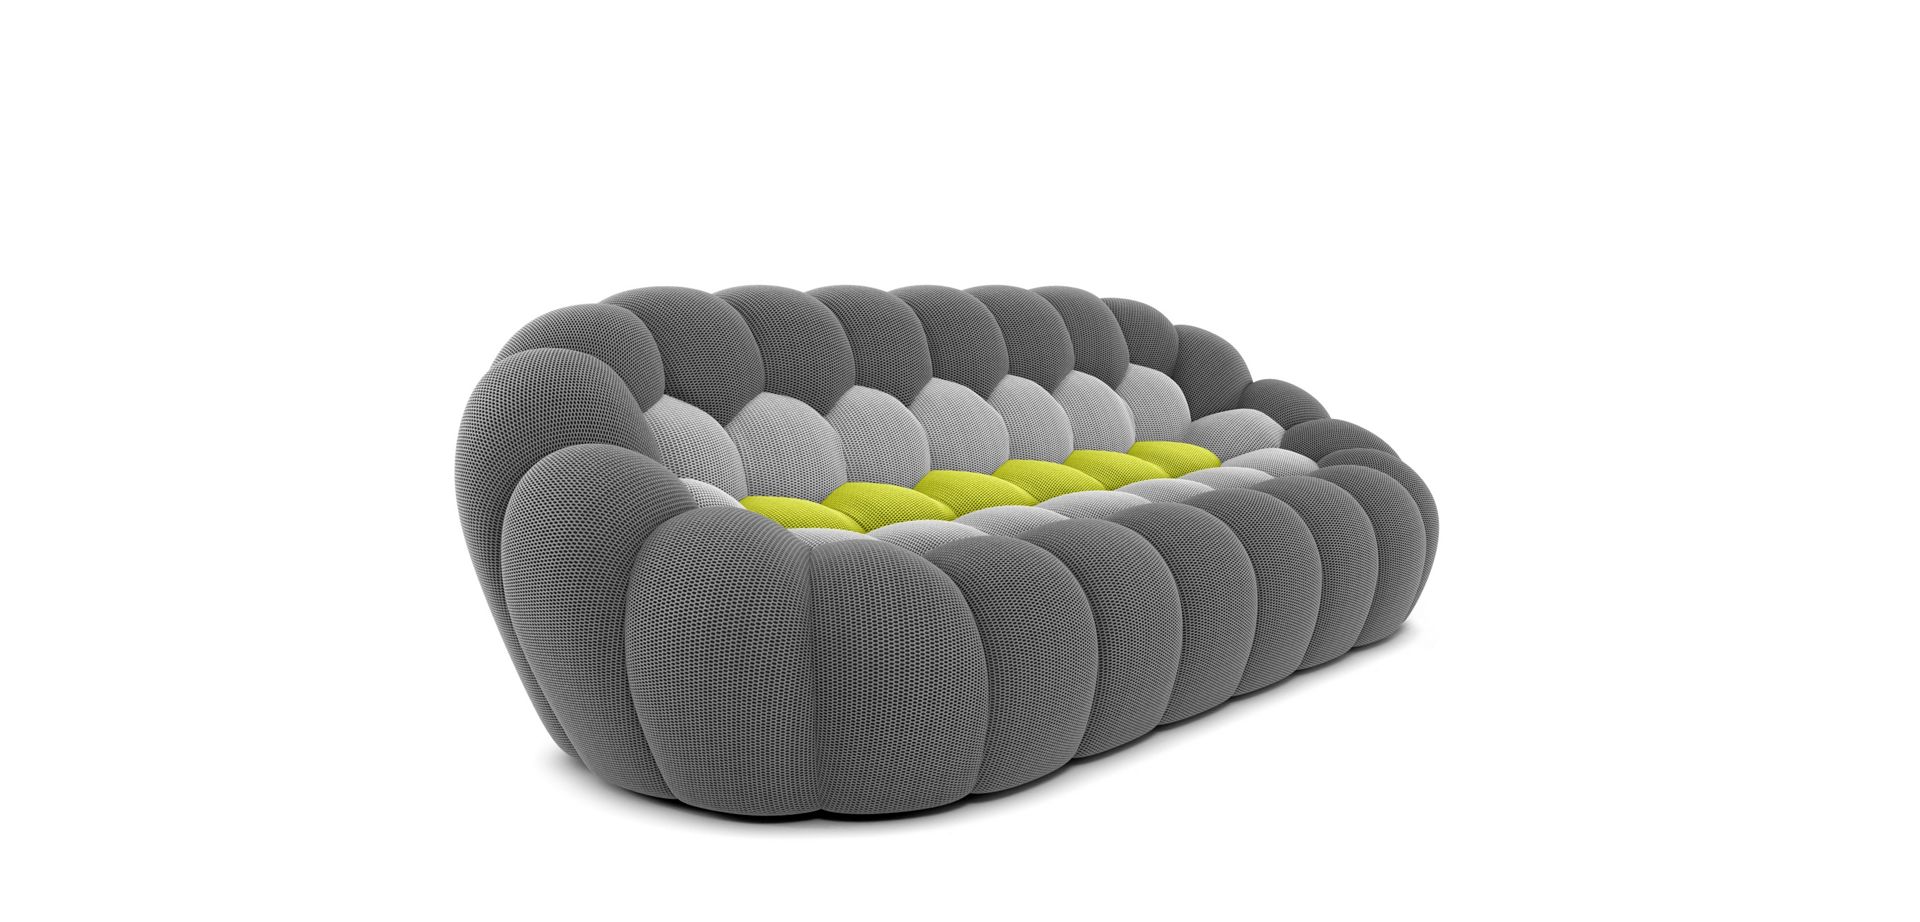 large 3-seat sofa - techno 3D image number 8